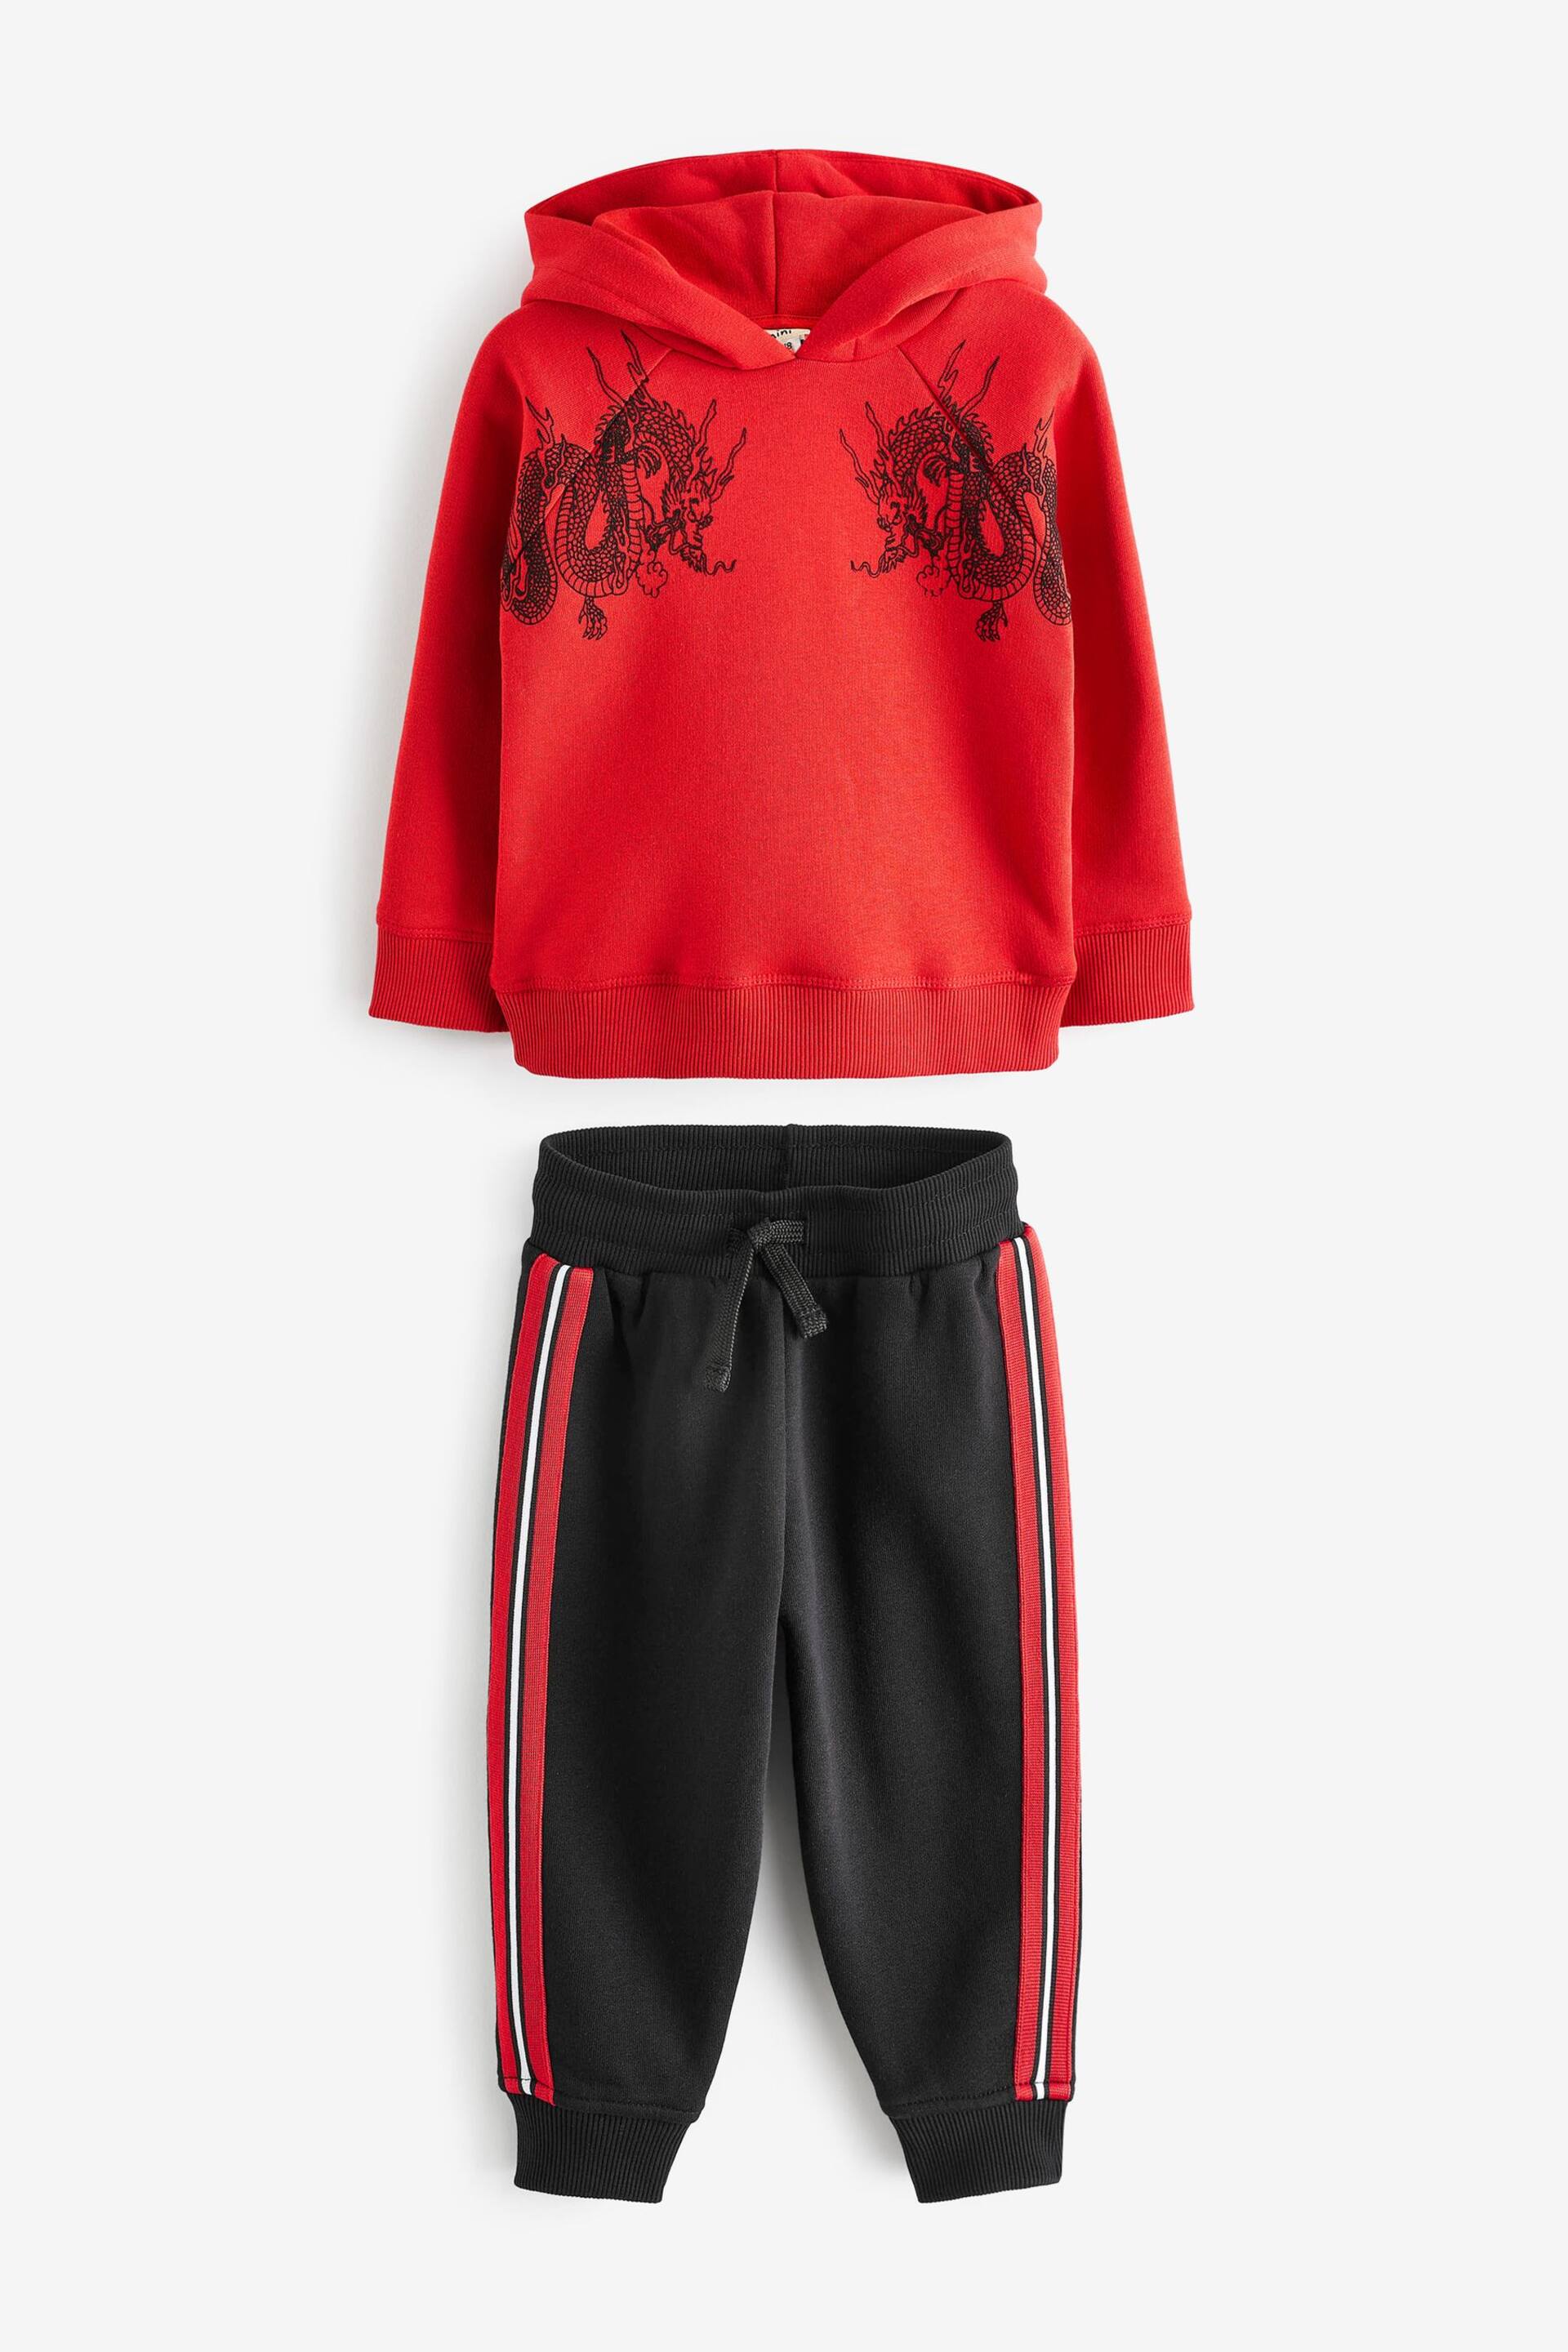 River Island Red Boys Dragon Hoody and Jogger Set - Image 1 of 3